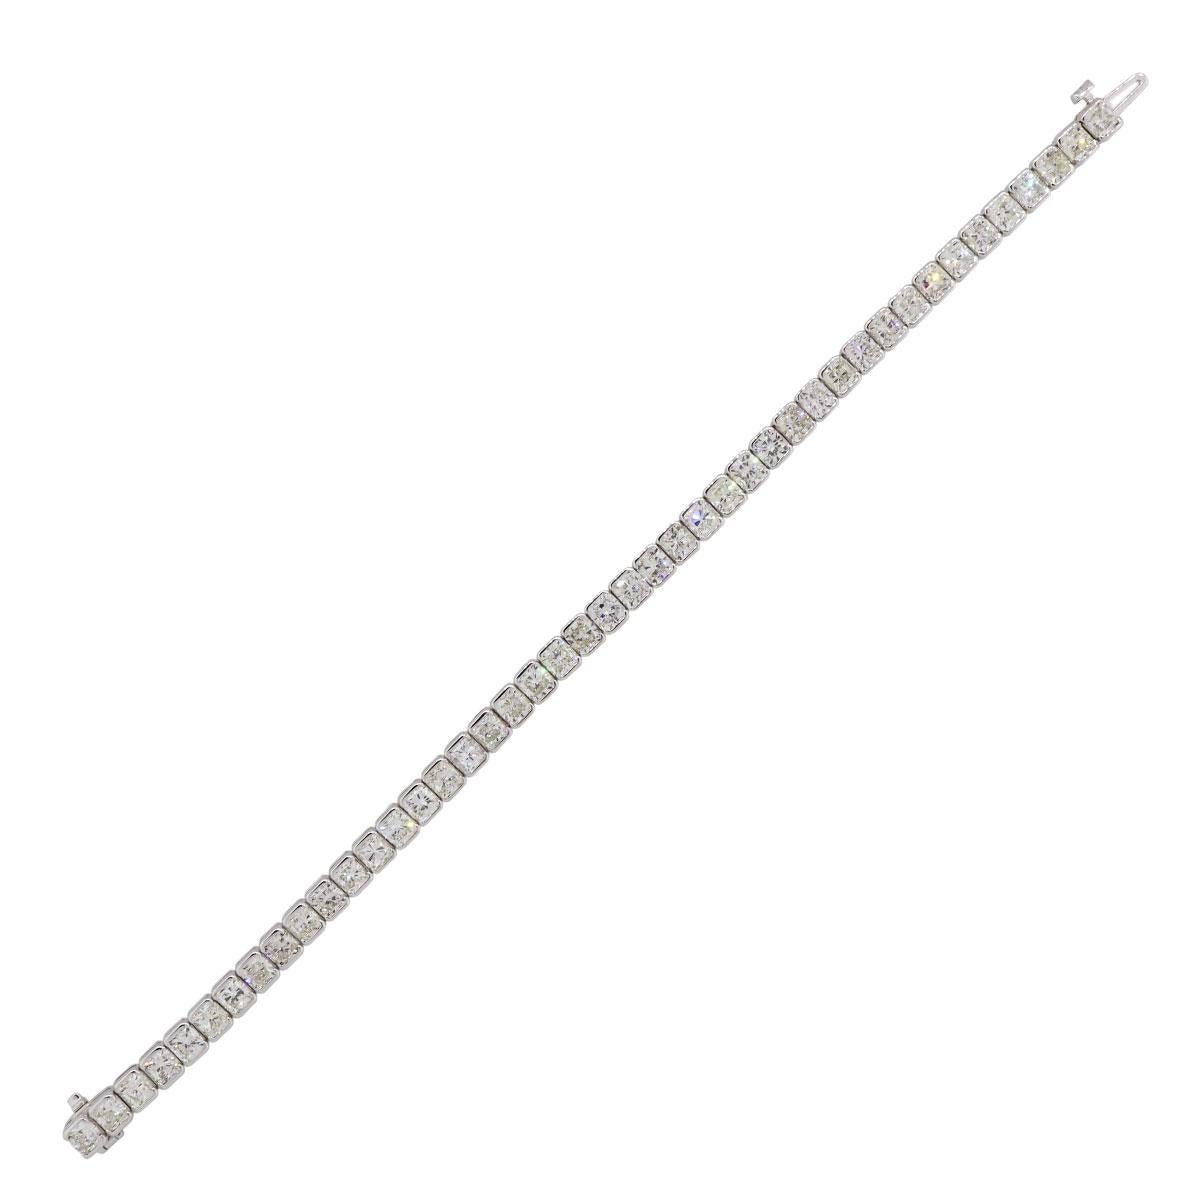 Material: 18k white gold
Diamond Details: Approximately 13.69ctw of cushion cut diamonds. Diamonds are G/H in color and VS in clarity.
Measurements: 7″ x 0.18″ x 0.13″
Clasp: Tongue in box clasp with safety clasp
Total Weight: 16.5g